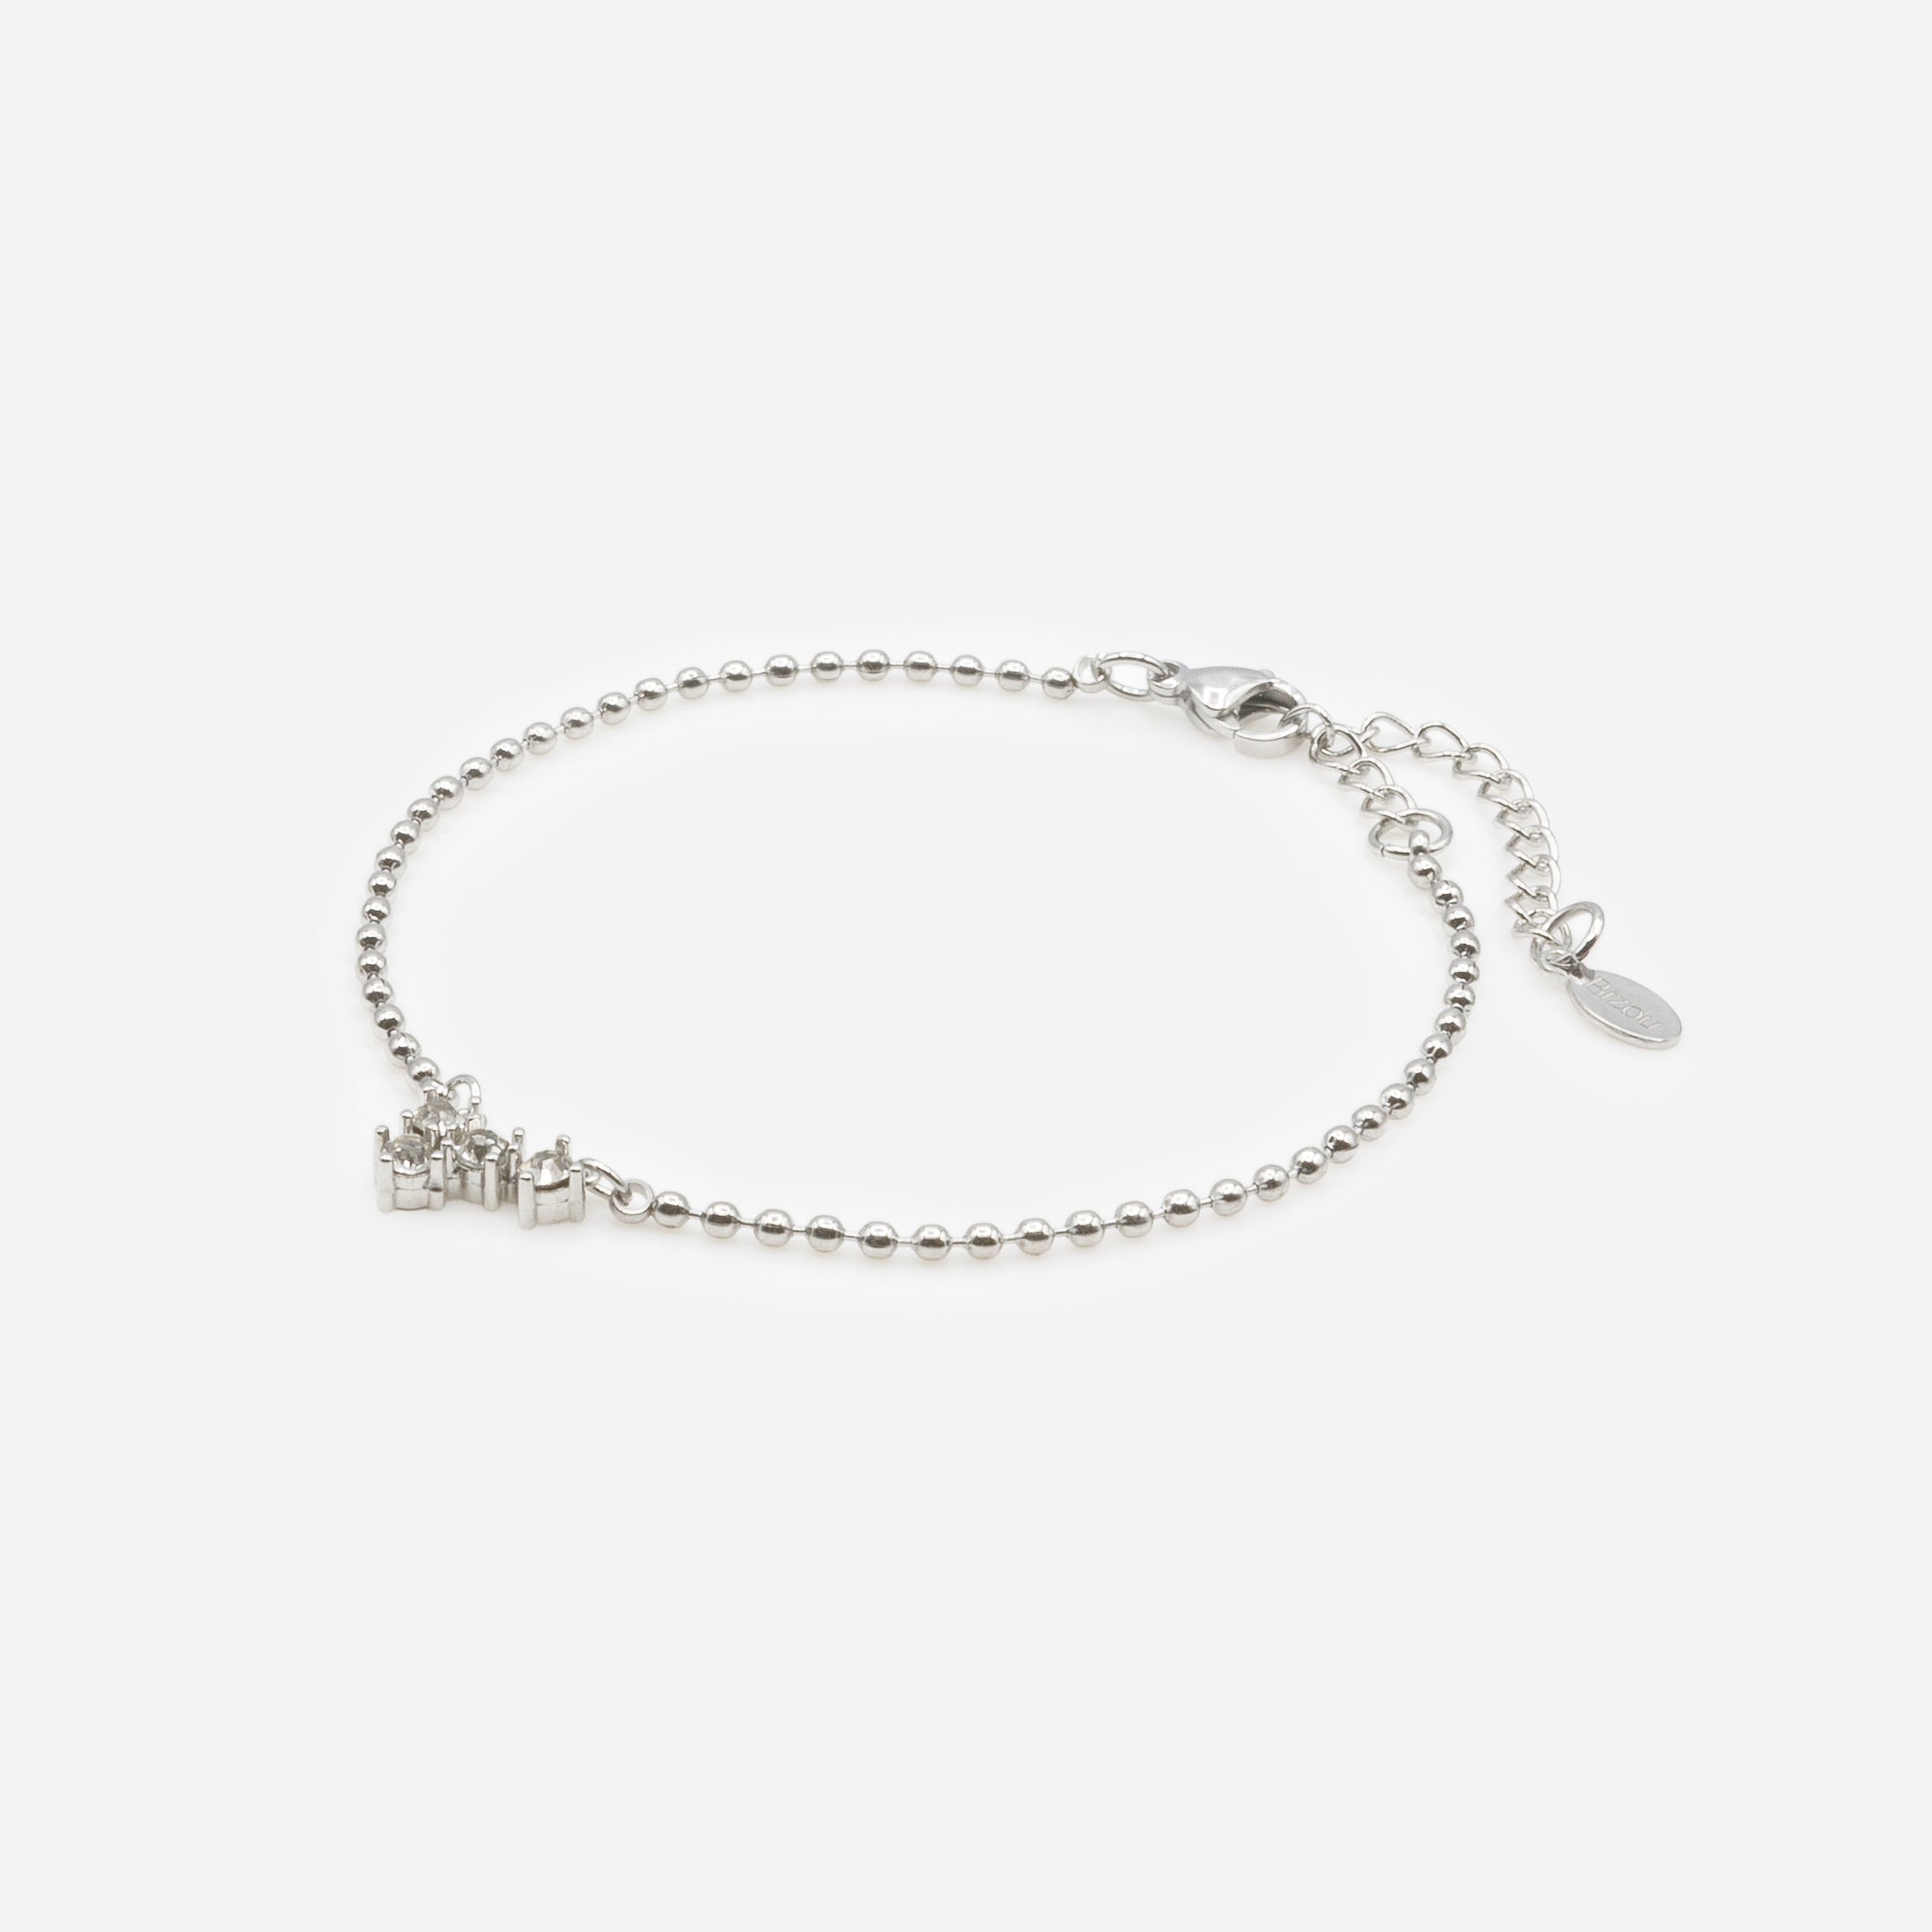 Fine silver bead bracelet and quartet of cubic zirconia in stainless steel